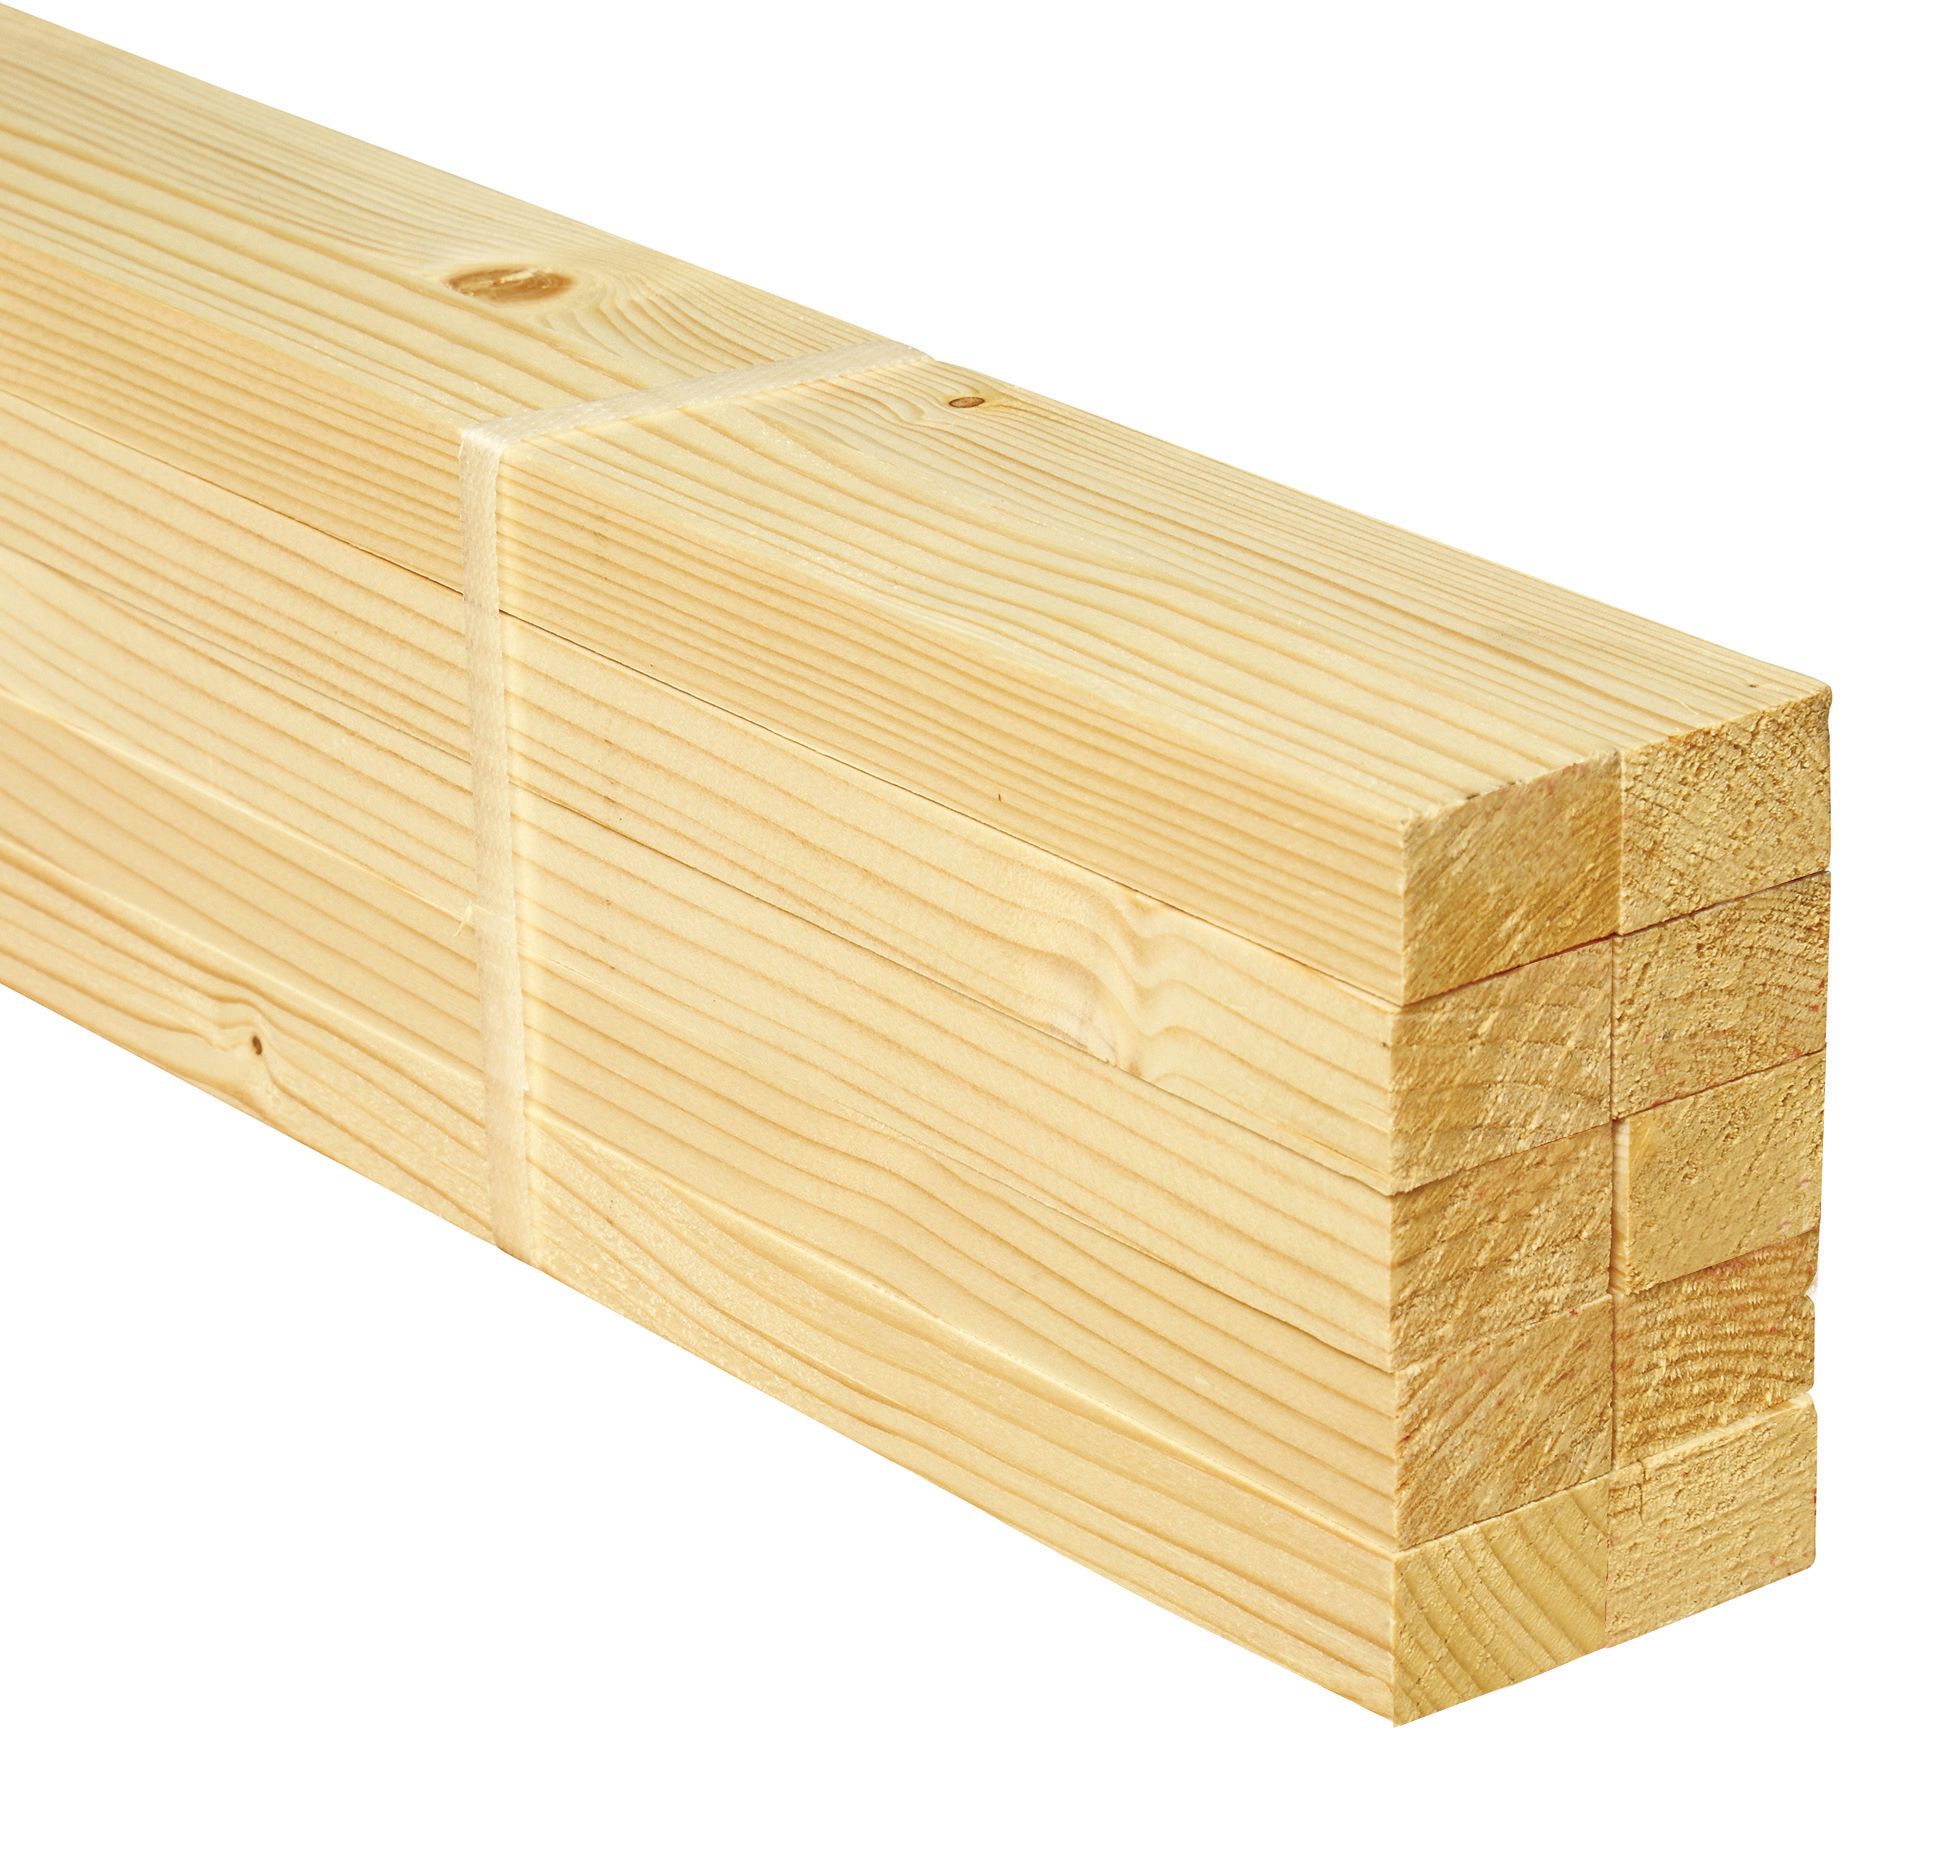 Wickes Whitewood PSE Timber - 18 x 28 x 1800mm - Pack of 10